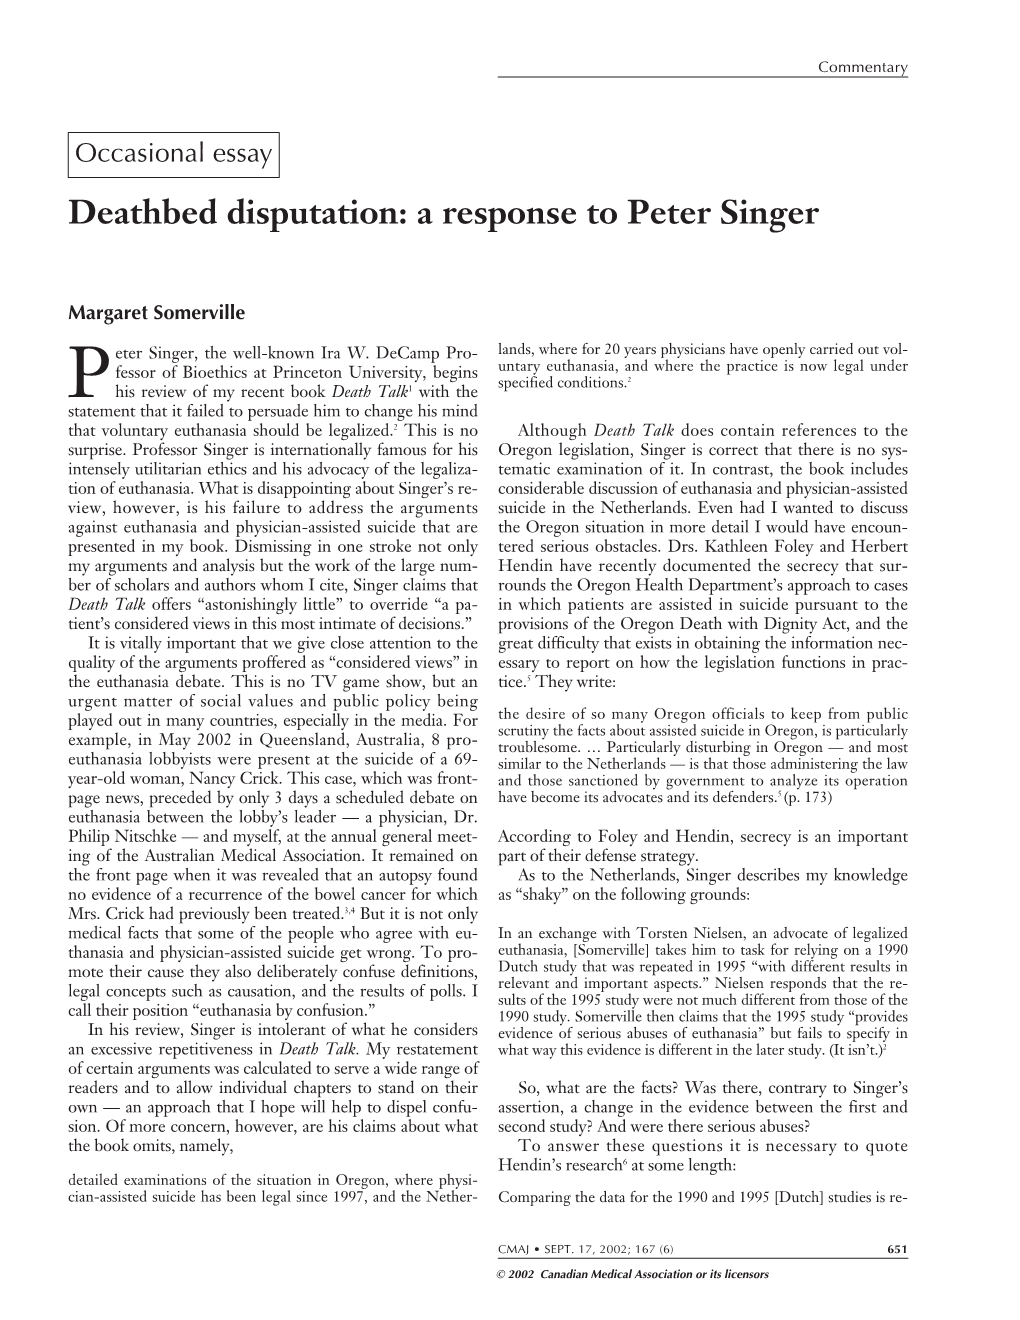 Deathbed Disputation: a Response to Peter Singer